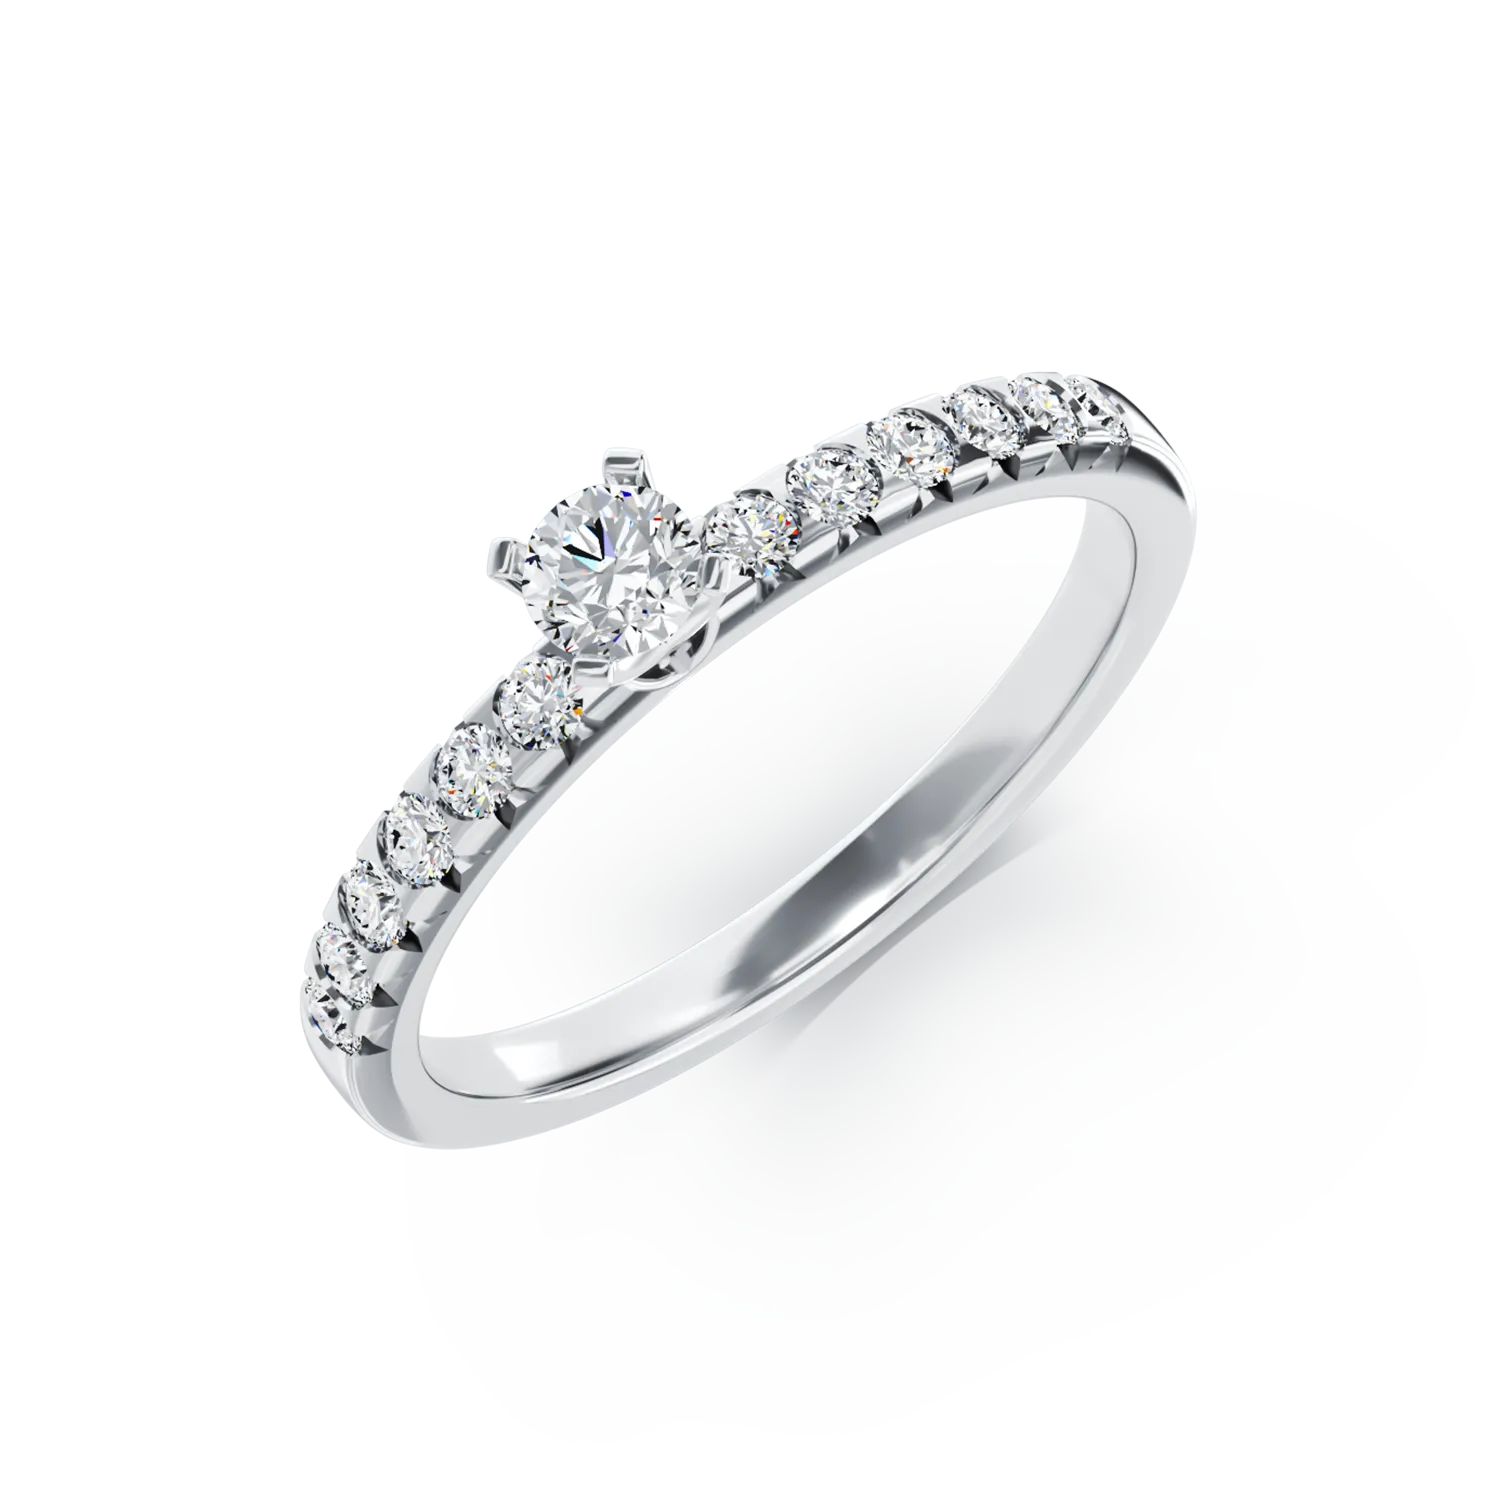 18K white gold engagement ring with 0.15ct diamond and 0.25ct diamonds